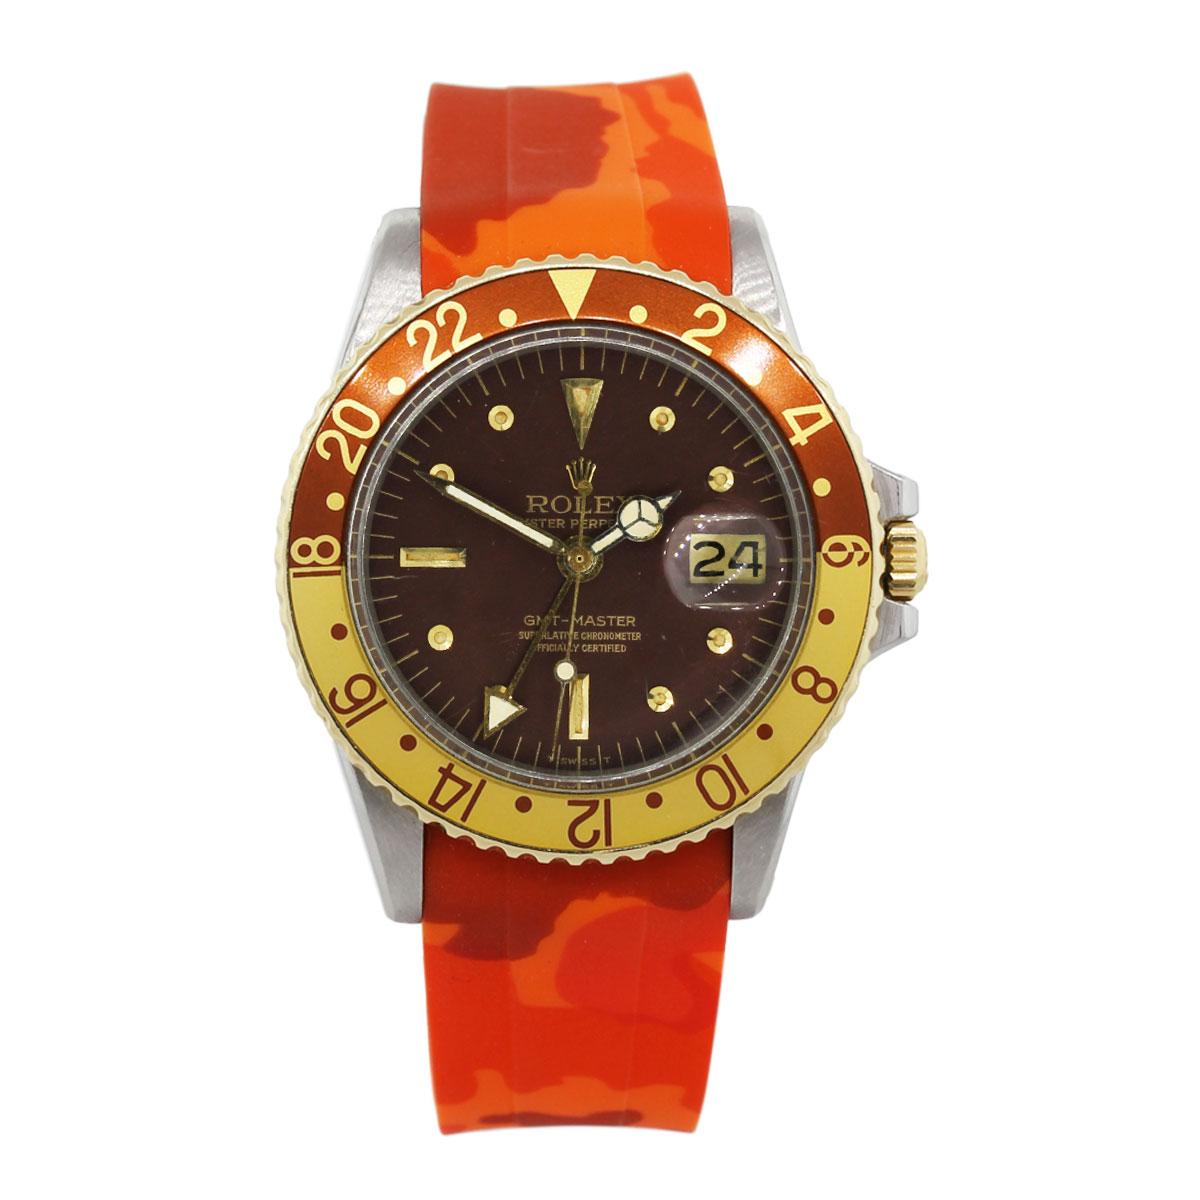 Brand: Rolex
MPN: 1675
Model: GMT-Master (root beer)
Case Material: Stainless steel
Case Diameter: 40mm
Crystal: Plastic
Bezel: Yellow and brown bidirectional bezel
Dial: Brown dial with date window and the 3 o’clock position
Bracelet: Horus orange